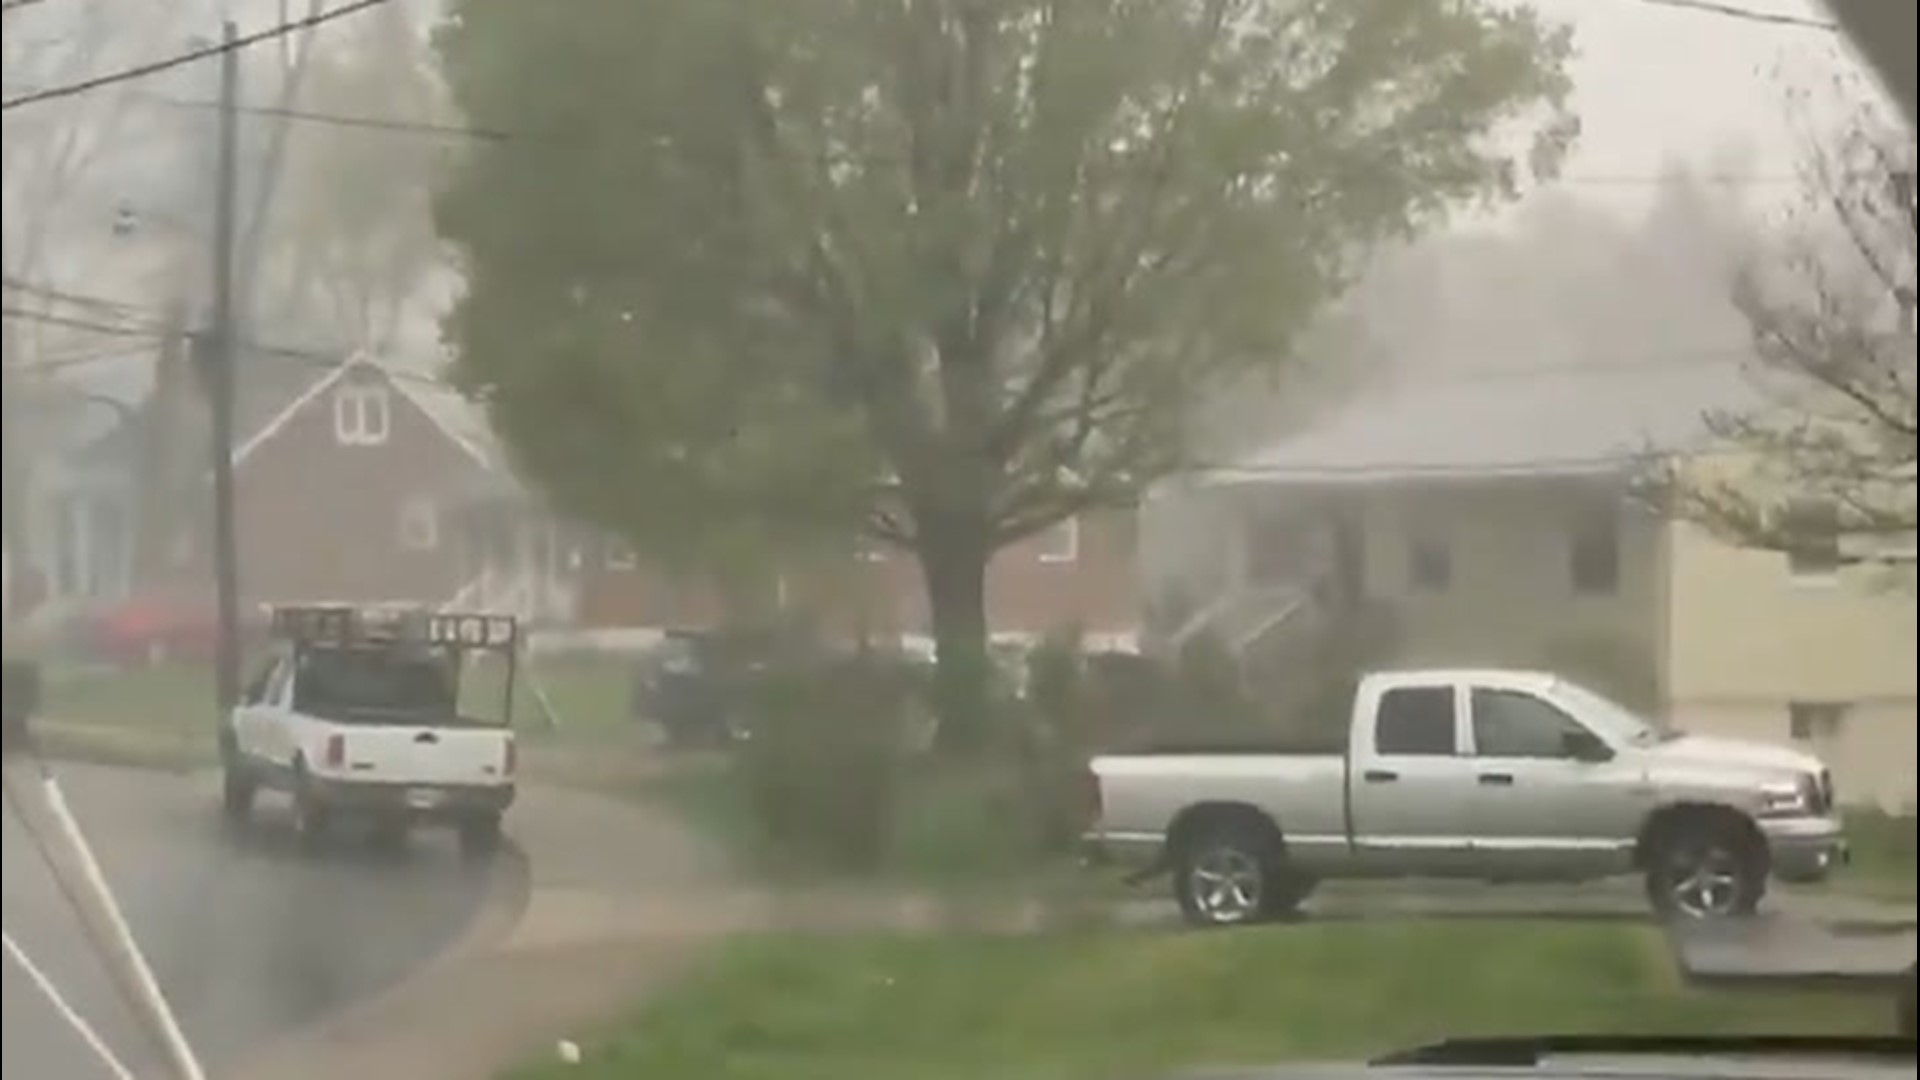 Storms moving through Virginia brought sheets of rain and wind to this neighborhood in Manassas on April 7.